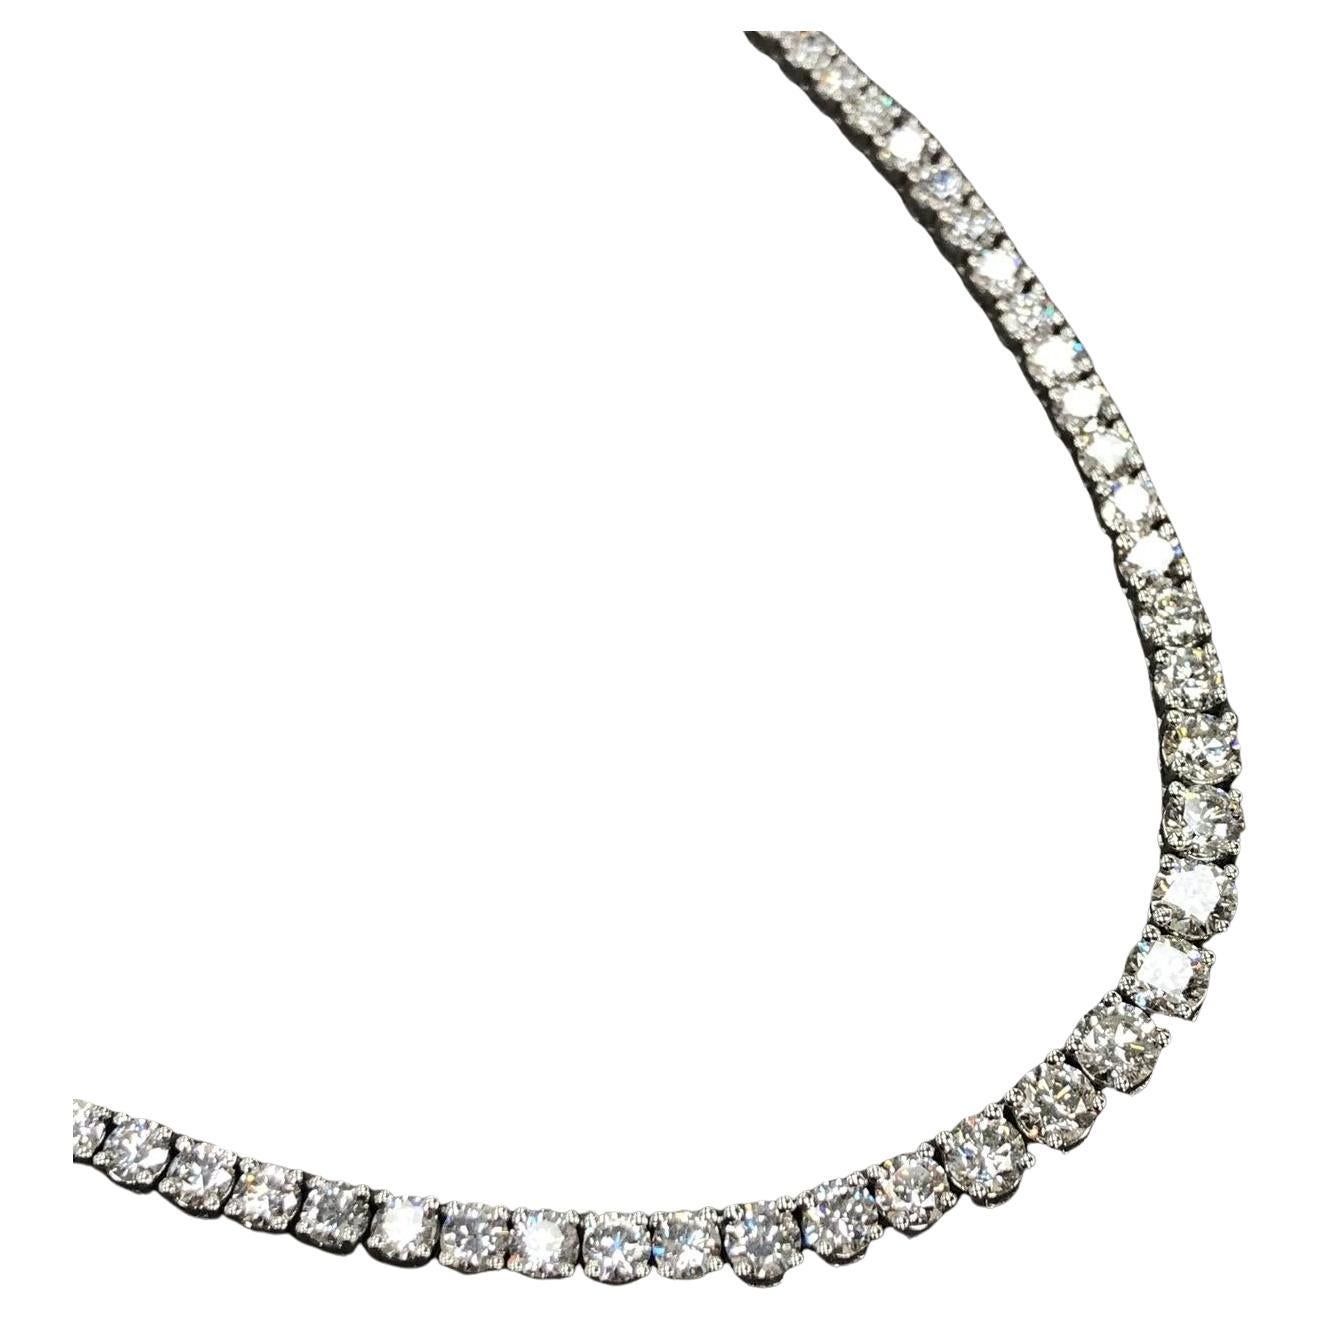 28 Carat Round Brilliant Cut Diamond Tennis Necklace Set in 18K White Gold In New Condition For Sale In Rome, IT